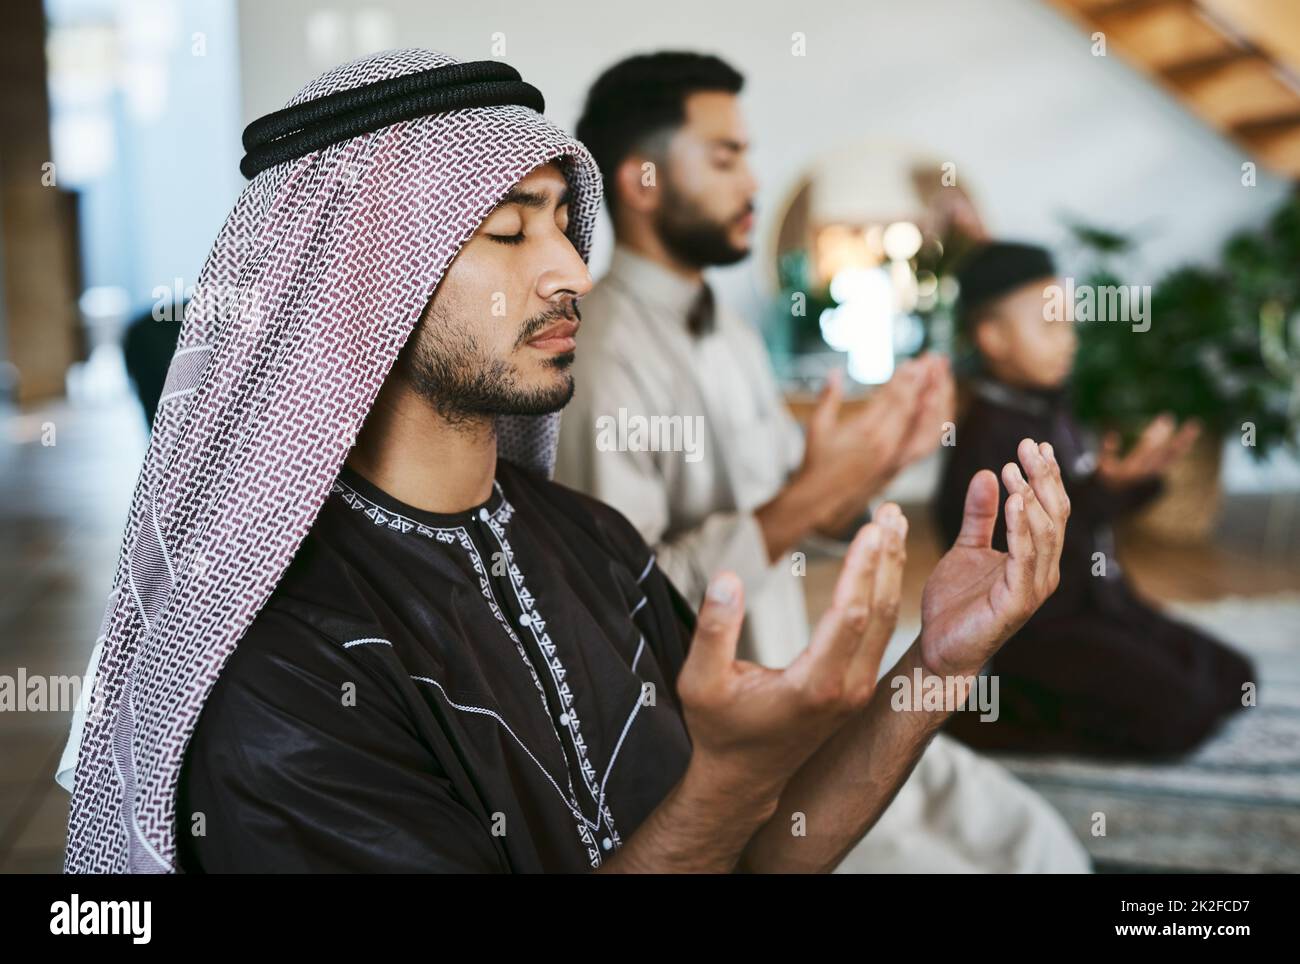 Prayer with a thankful heart. Shot of a group of muslim male family members praying together. Stock Photo